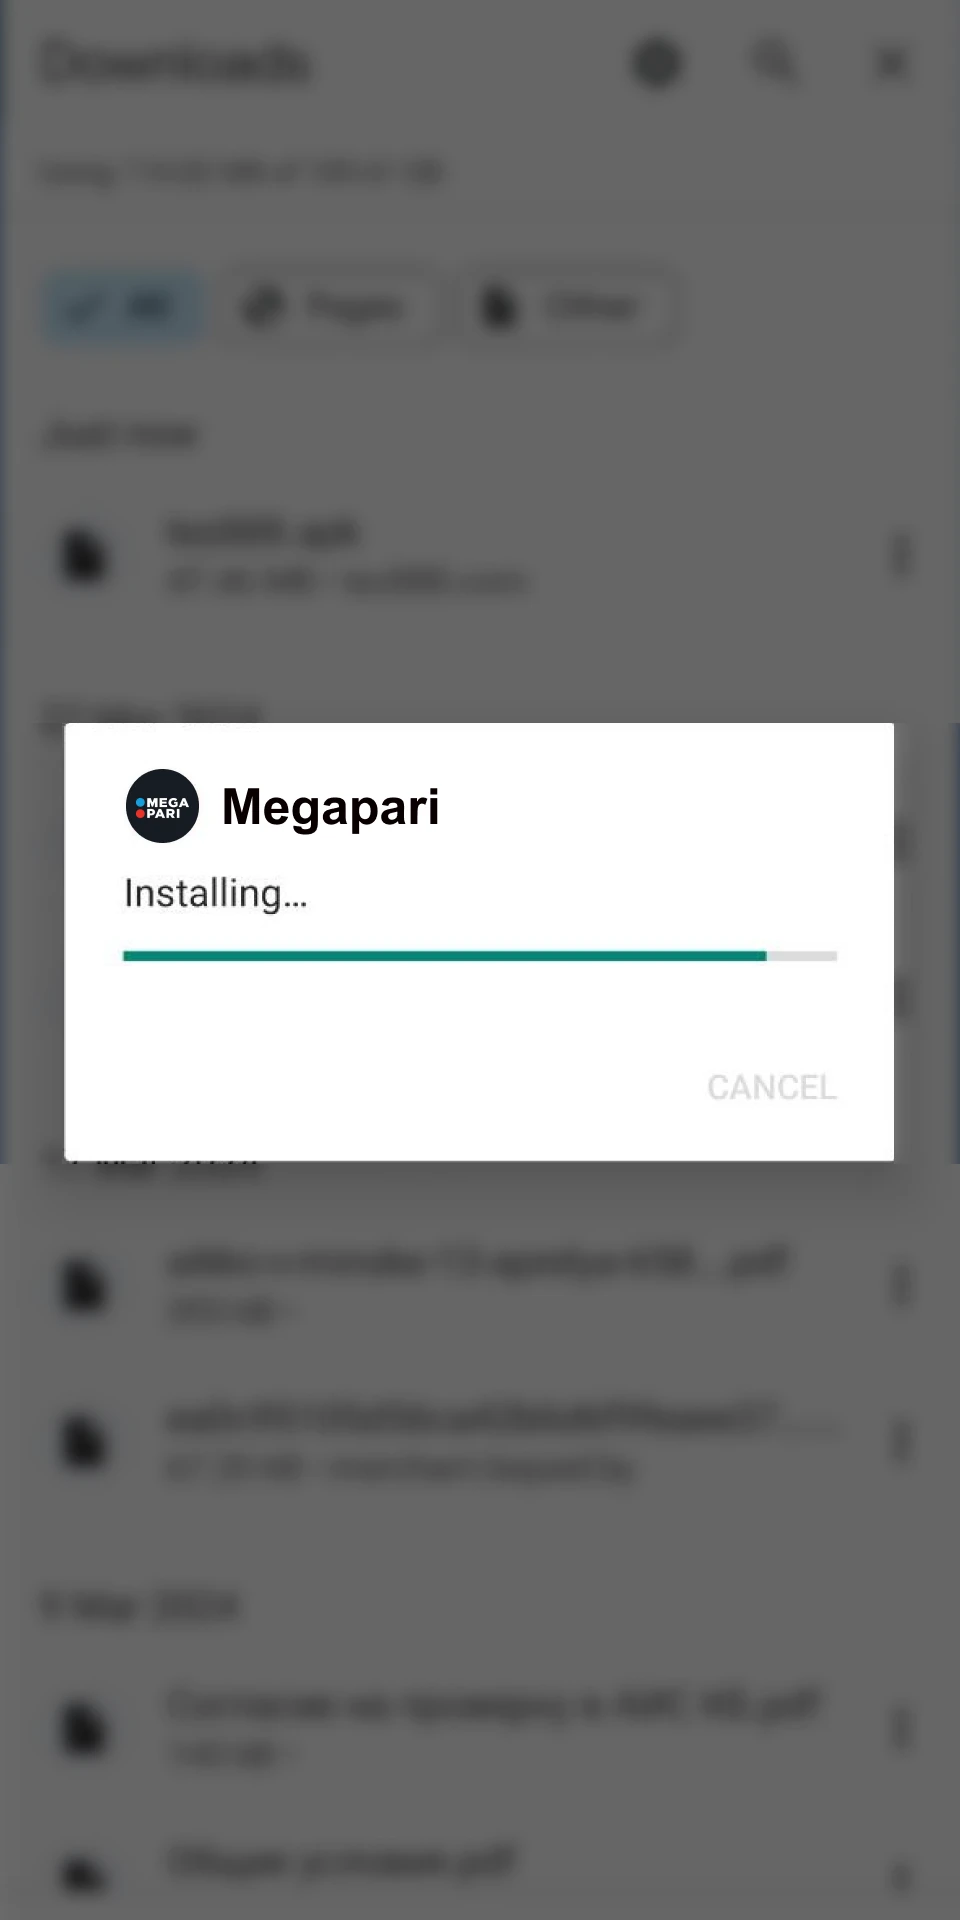 Once the Megapari APK is downloaded to your phone, install the app.